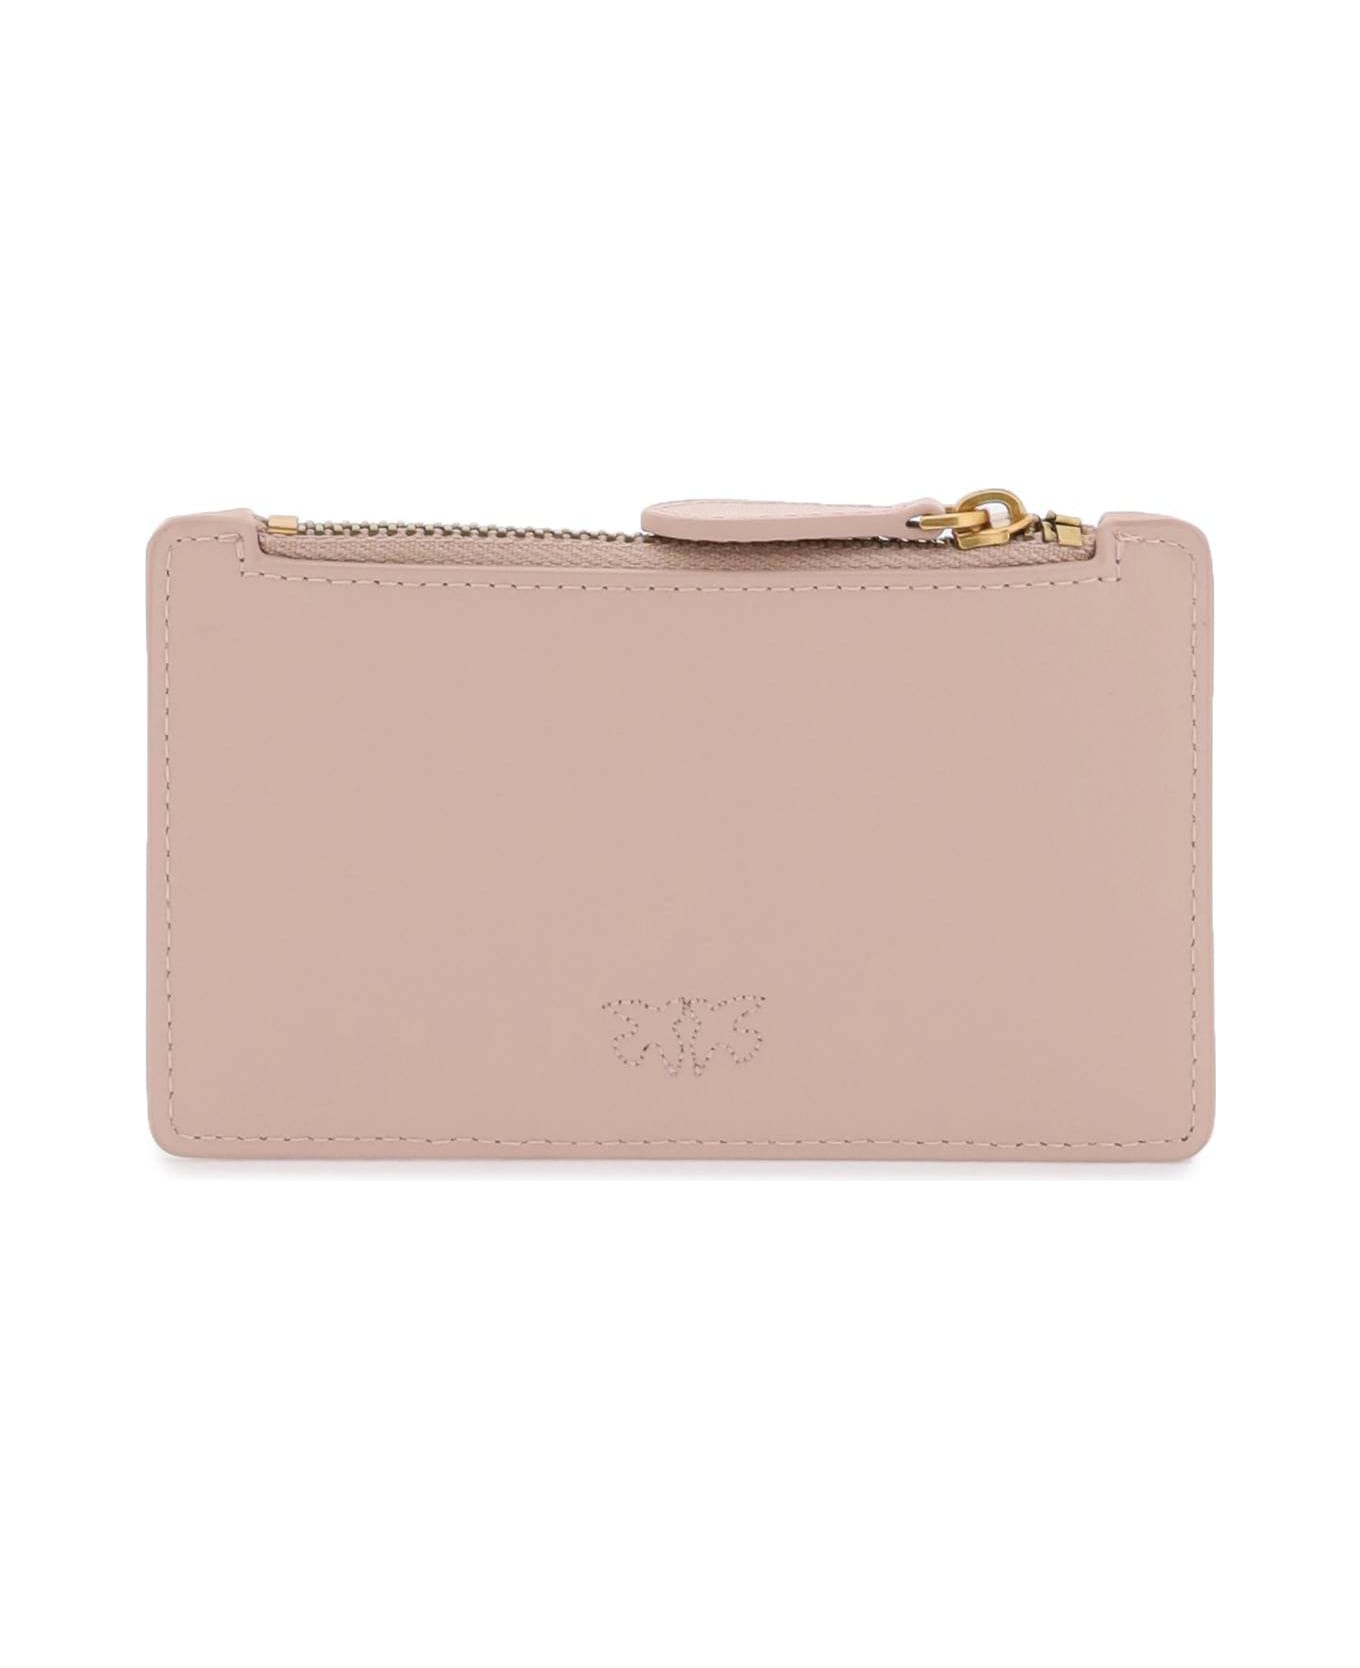 Pinko Card Holder With Logo - CIPRIA ANTIQUE GOLD (Pink)